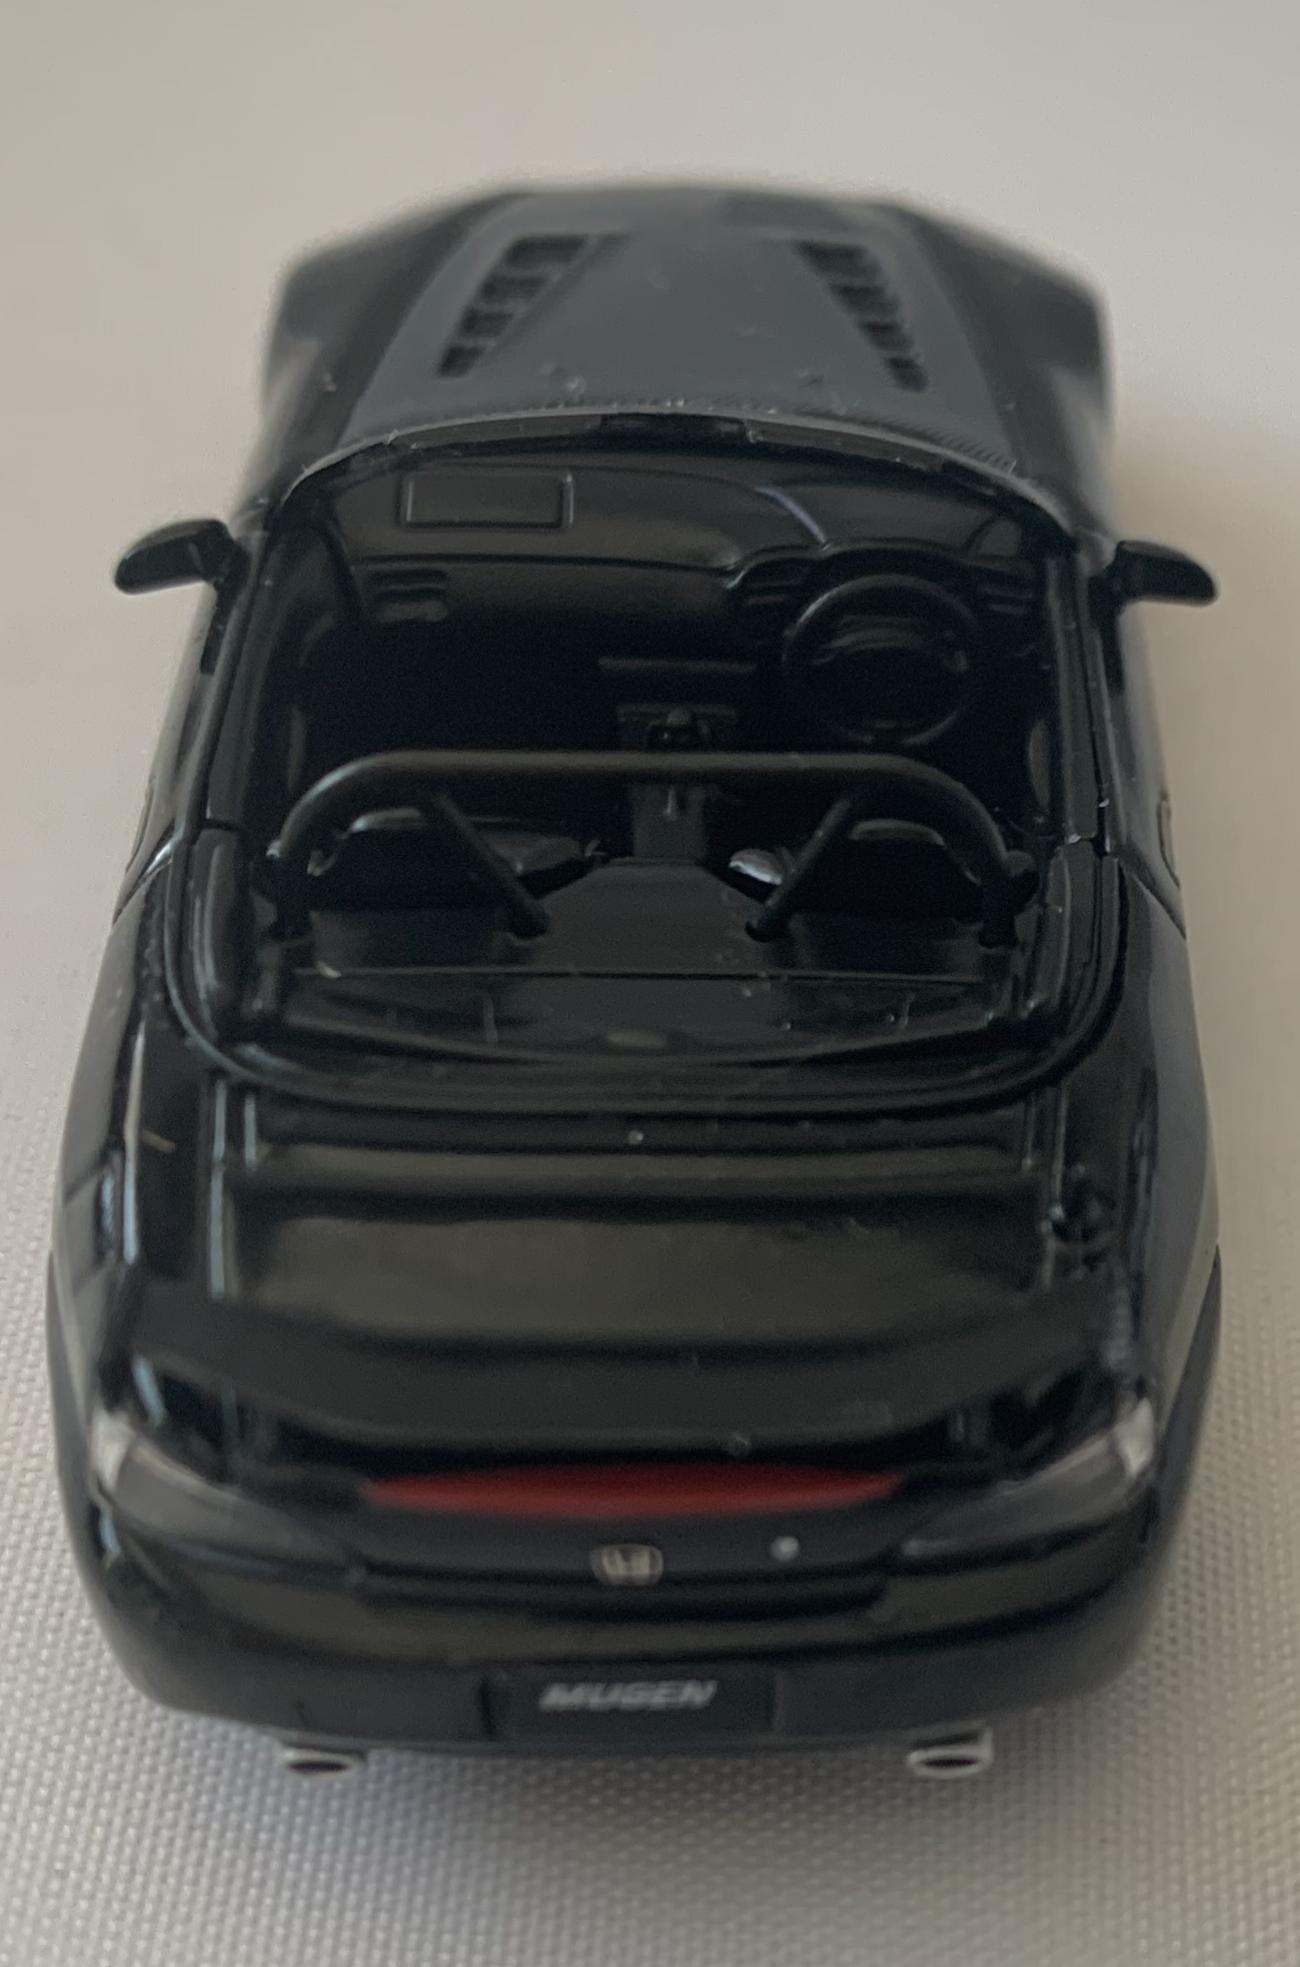 An excellent scale model of a Honda S2000 (AP2) decorated in berlina black with carbon effect bonnet and air vents, high rear spoiler and gold wheels